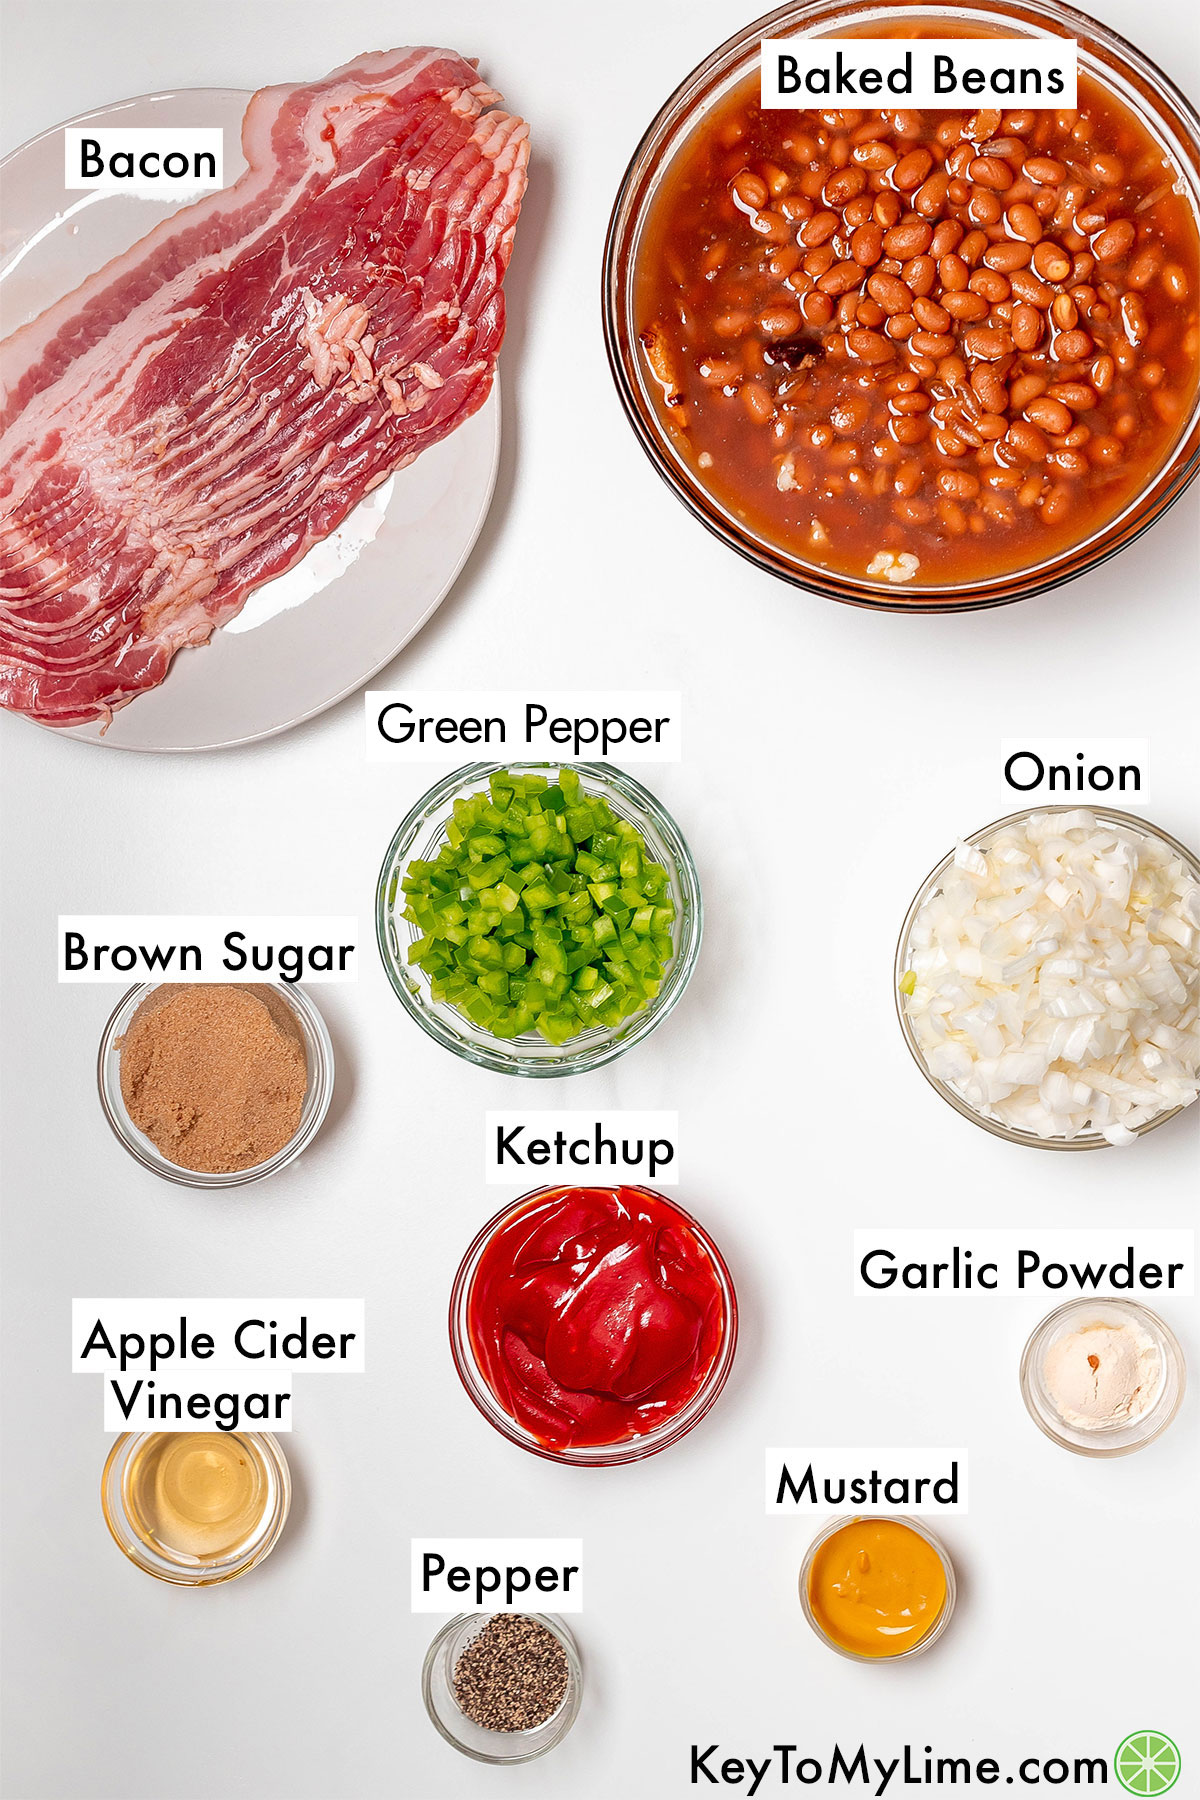 The labeled ingredients for crockpot baked beans.